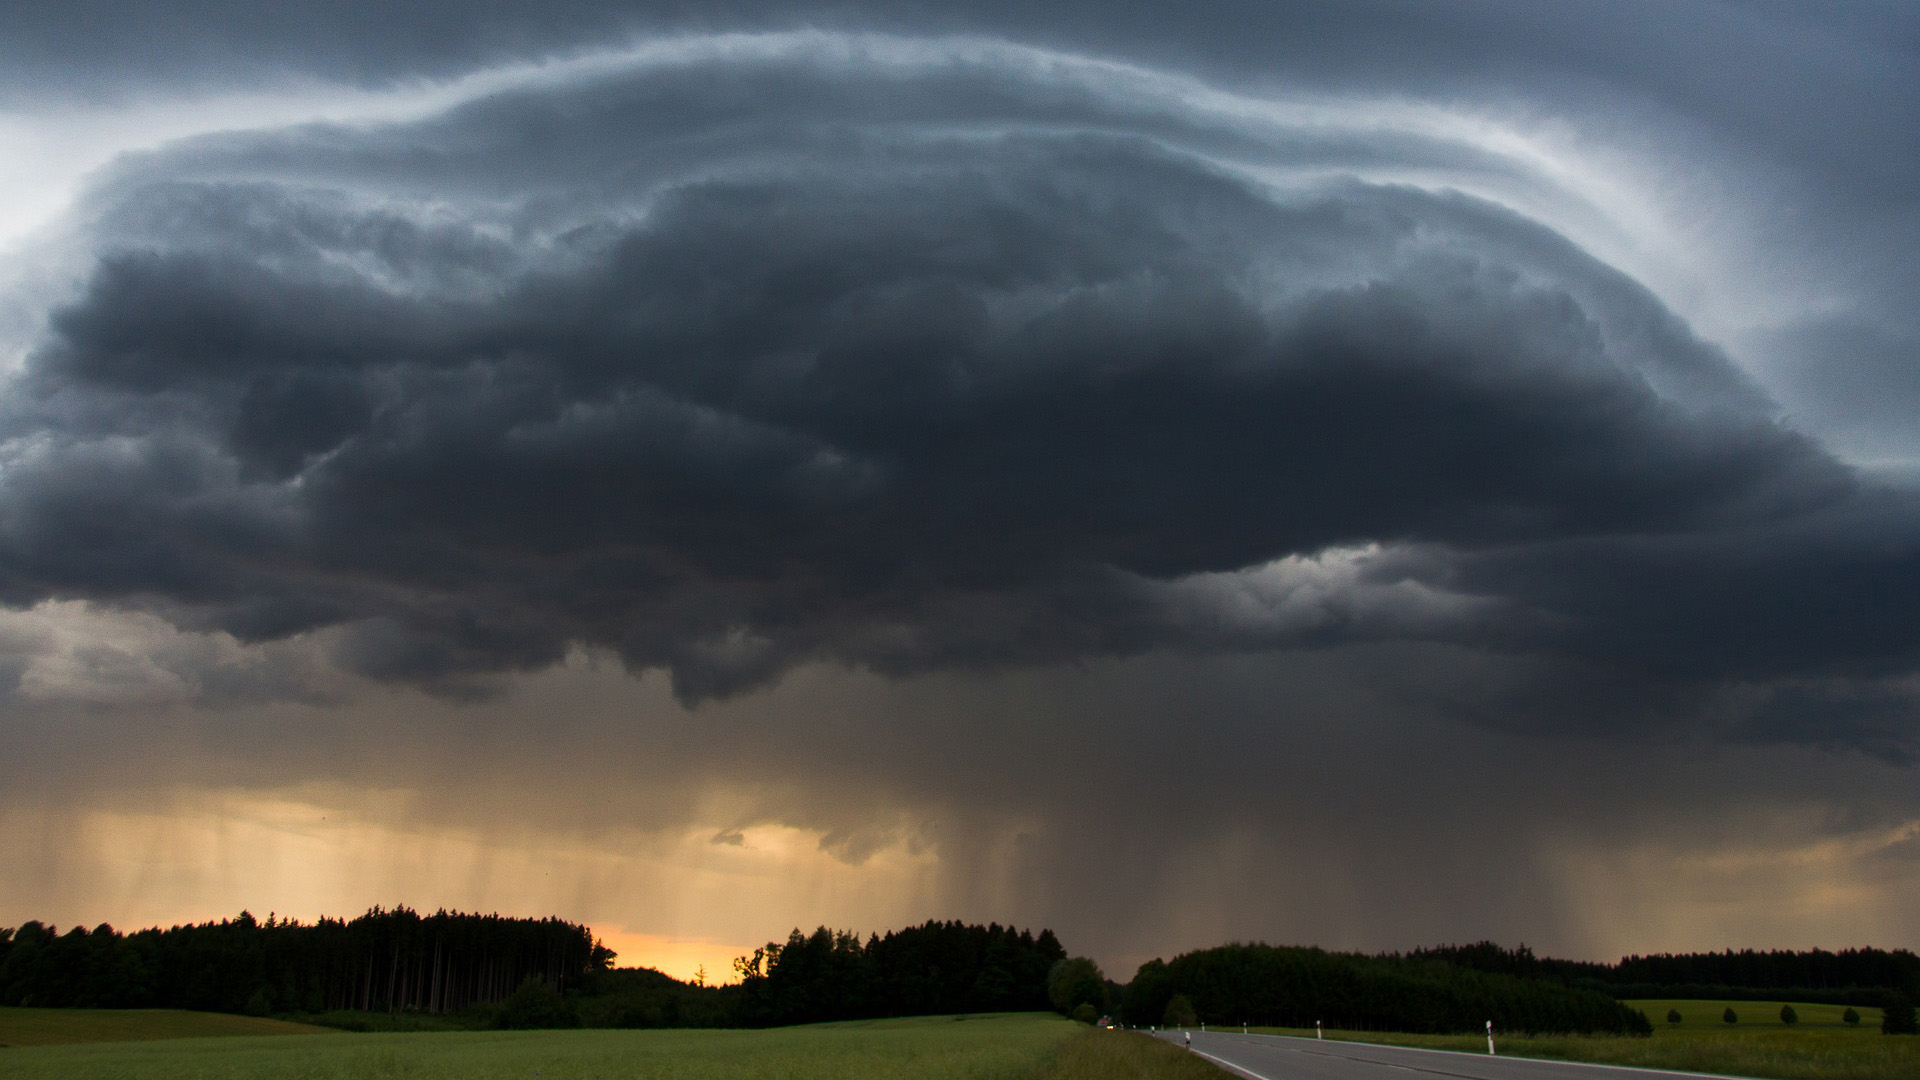 16_9_storm-3160015_1920_Image by Tobias Hämmer from Pixabay